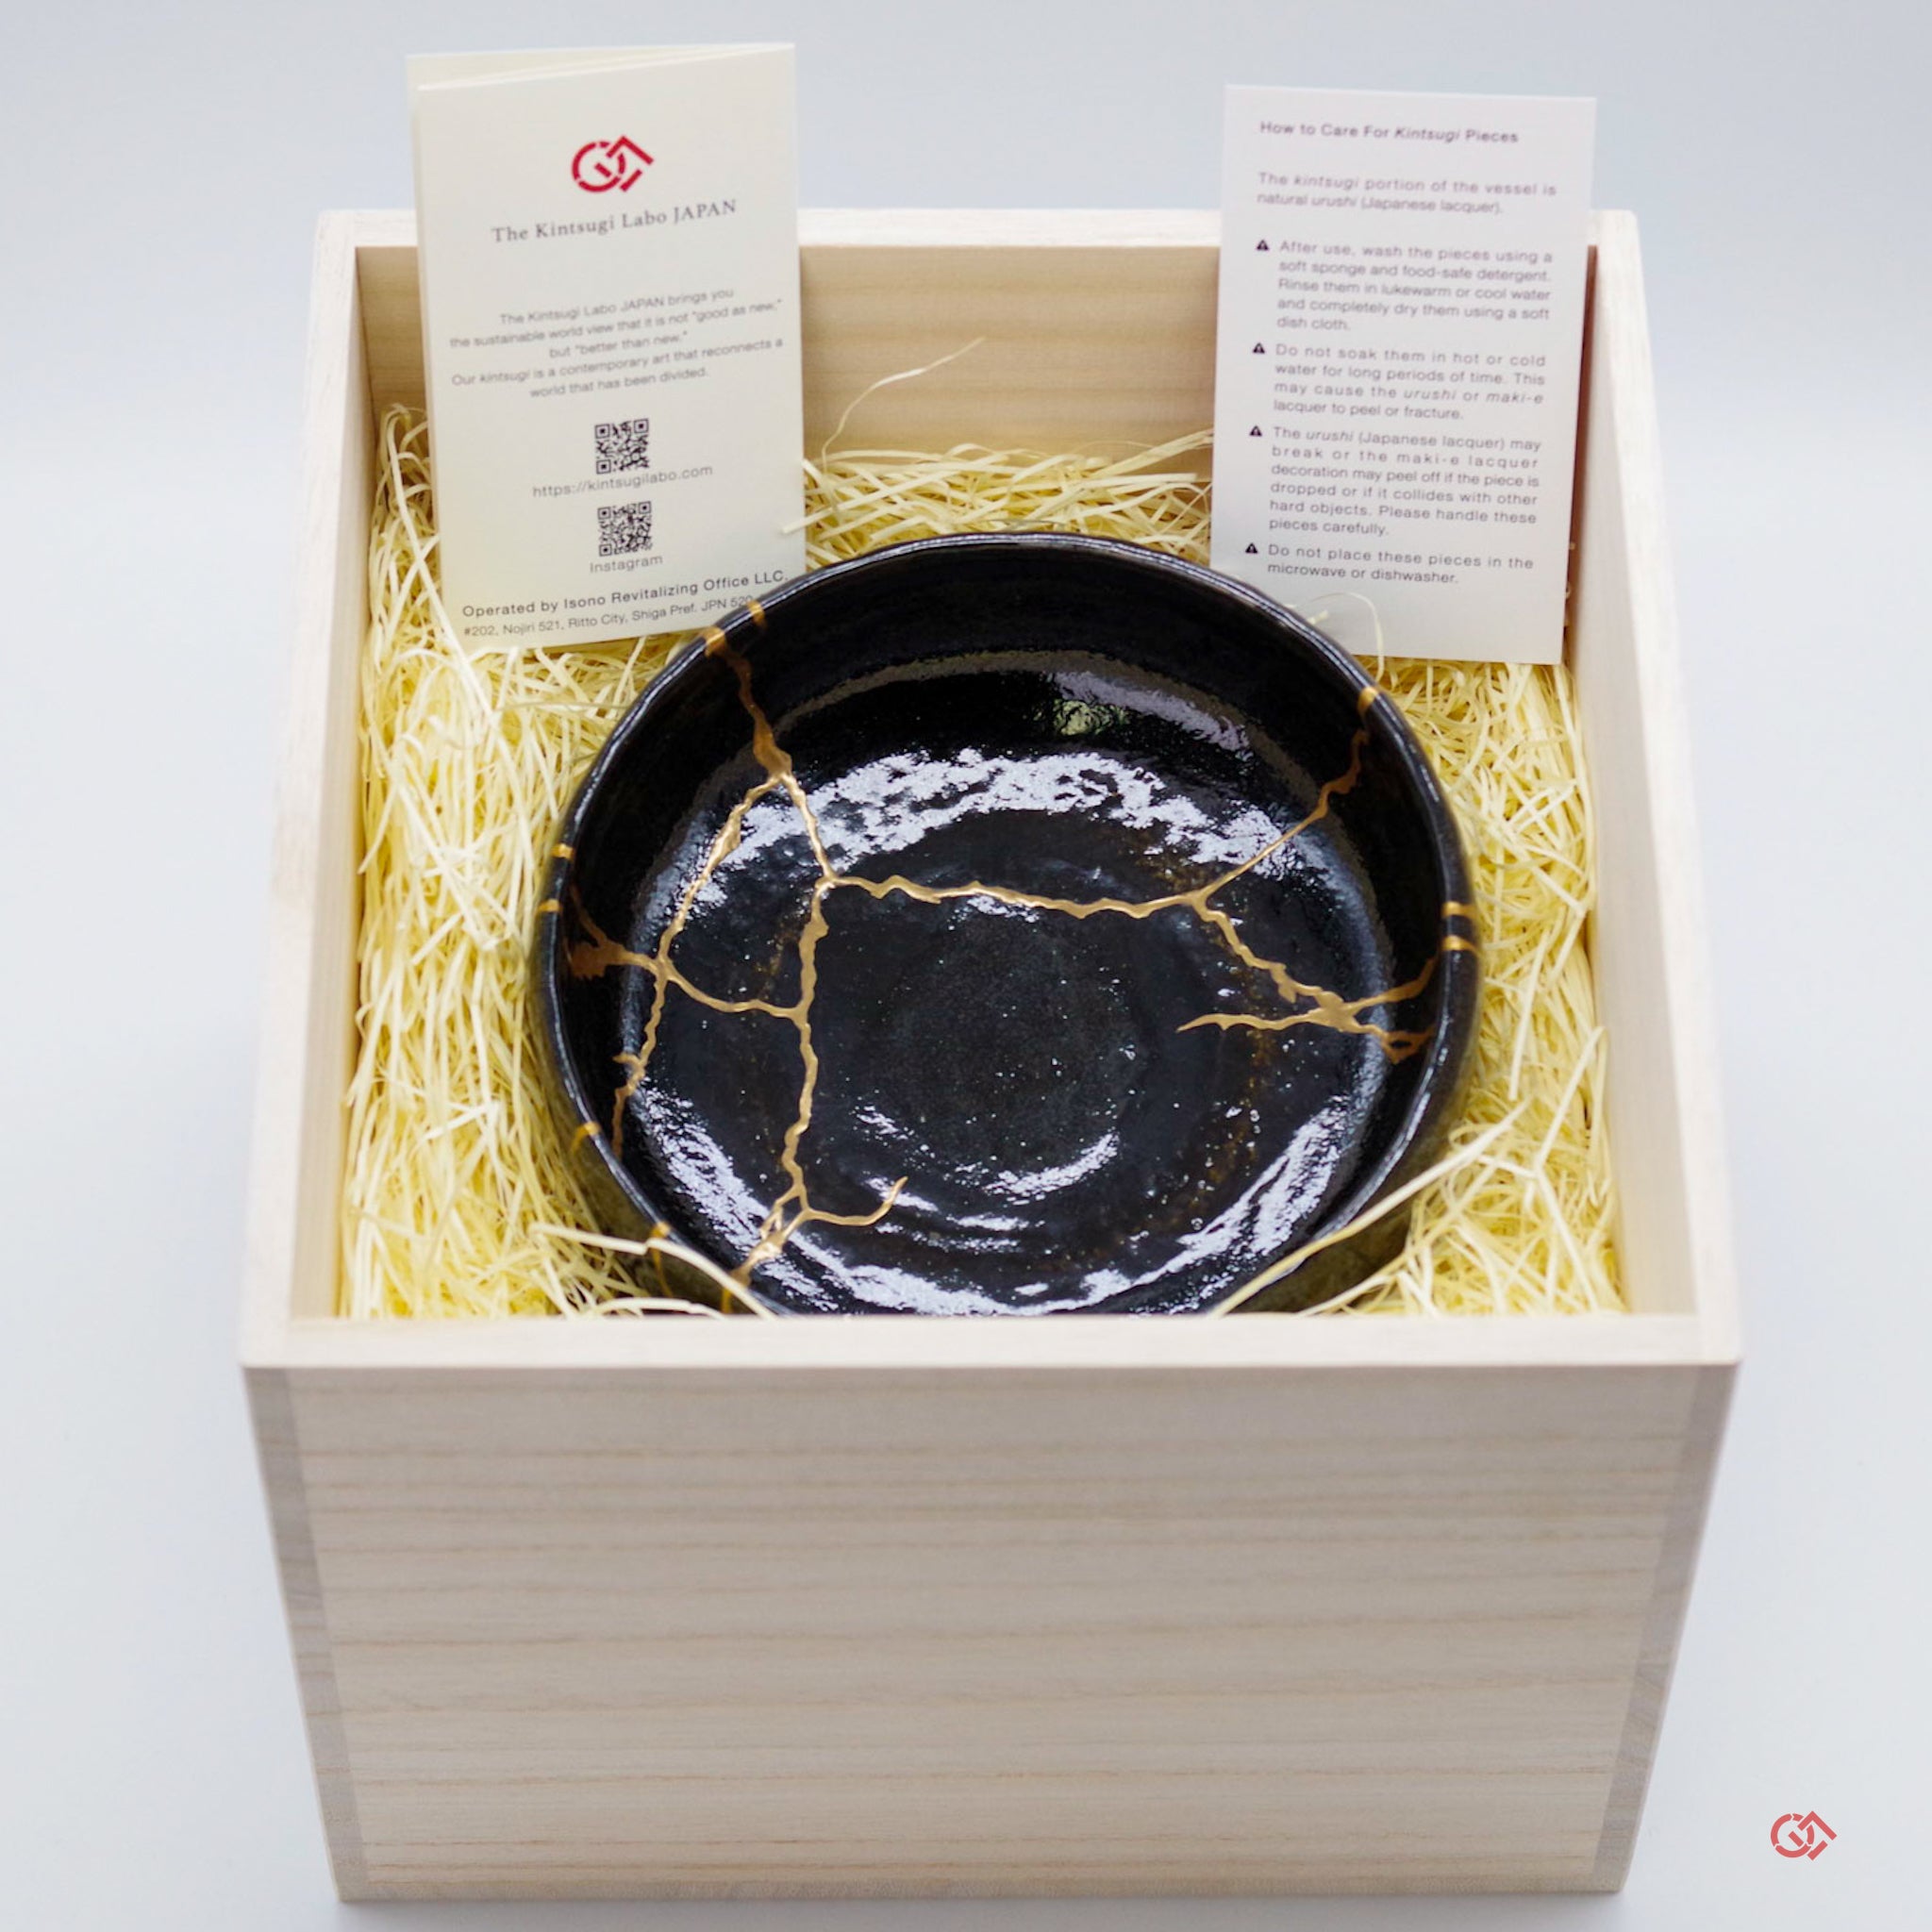 Example of Paulownia Box Packaging for Kintsugi piece